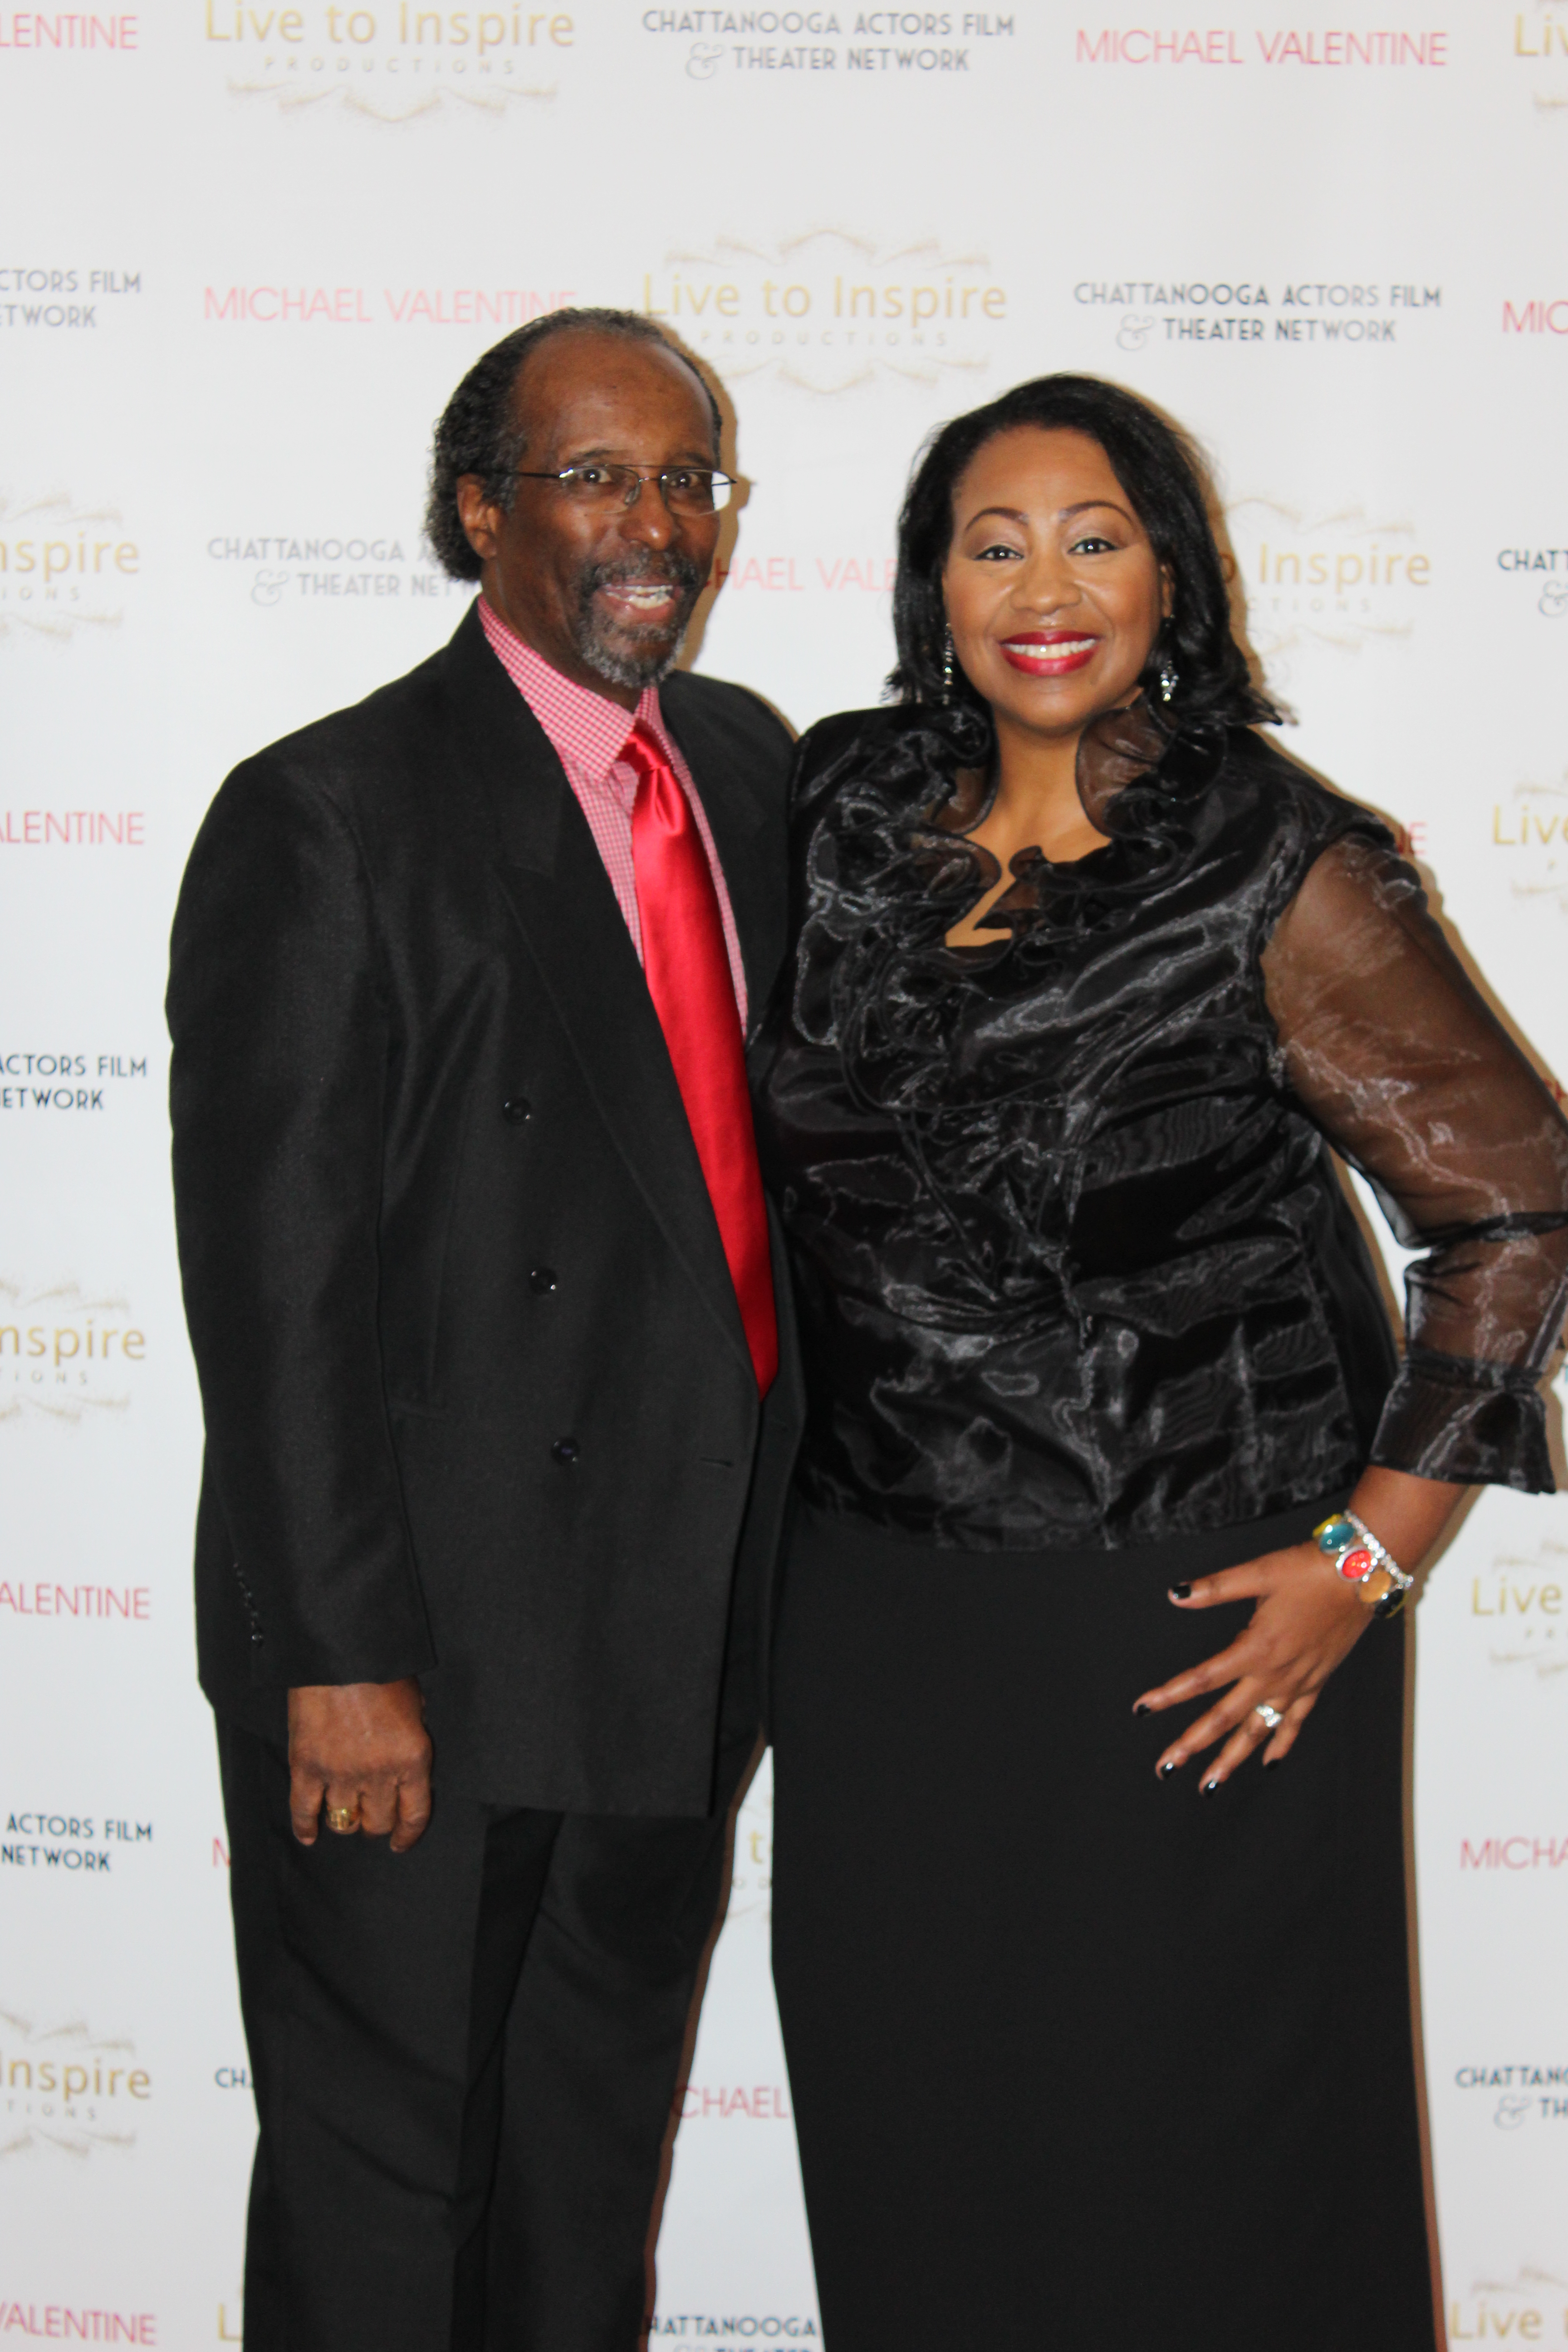 Shelia Wofford and William M. Holloway Jr. on the red carpet event at the cast wrap party of Michael Valentine the movie 2016.